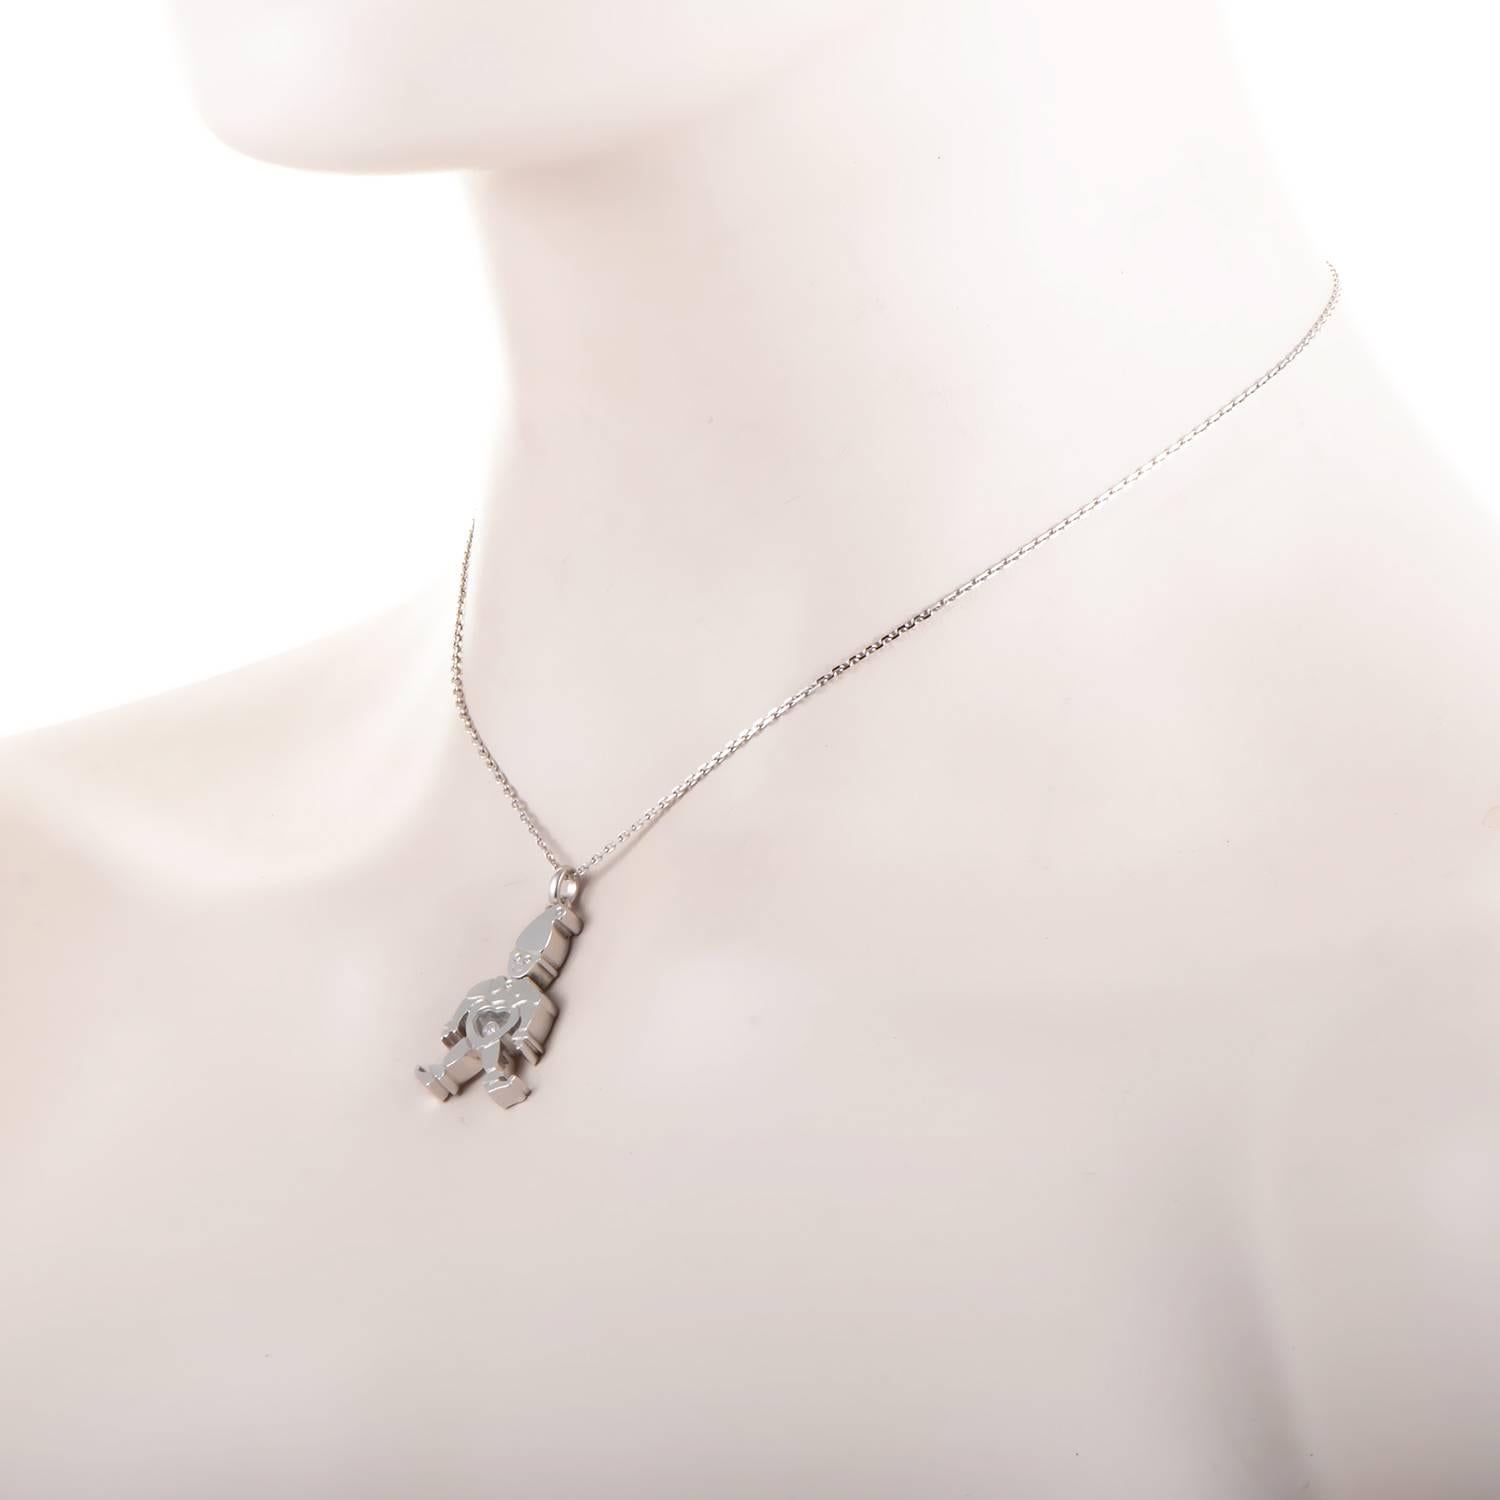 Mischief and mystery abound with elfin charm. 18K white gold is playfully molded into the limbs, torso and grinning face of an elf. With cap, bow tie and curl-toed boots included, this seasonal character's heart is out in the open. The glistening